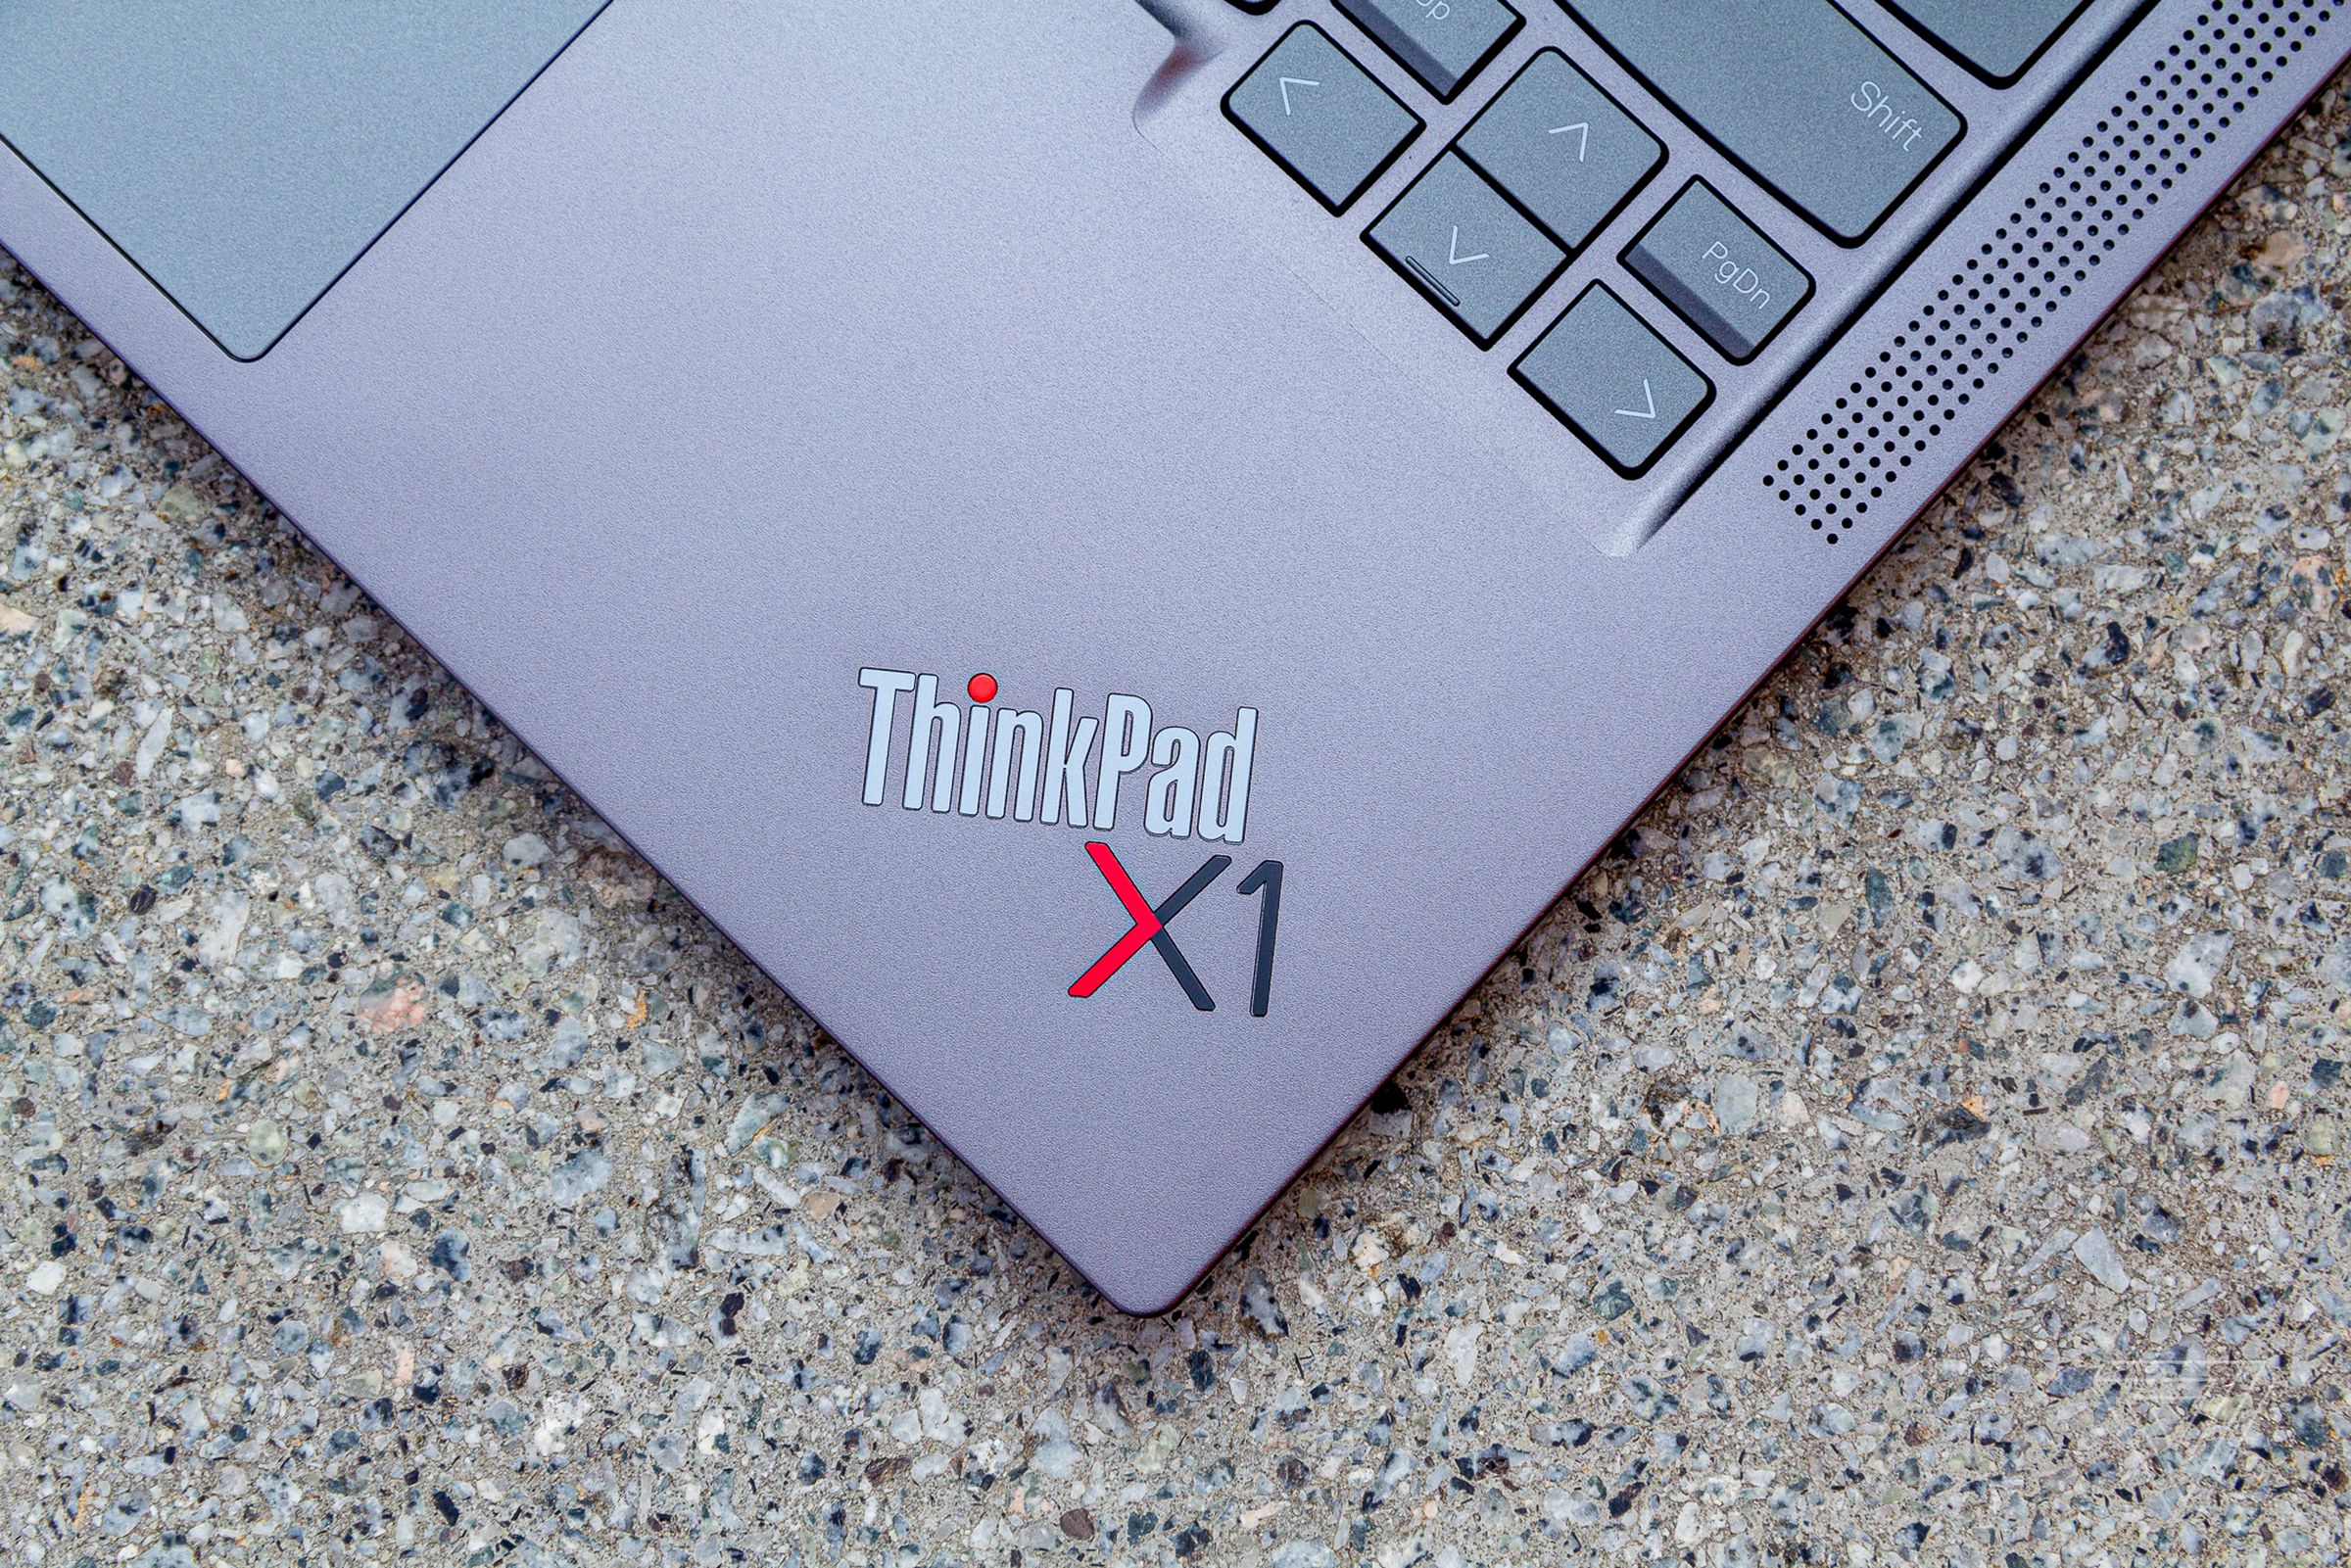 The ThinkPad X1 logo on the ThinkPad X1 Yoga Gen 6 seen from above on a stone table.